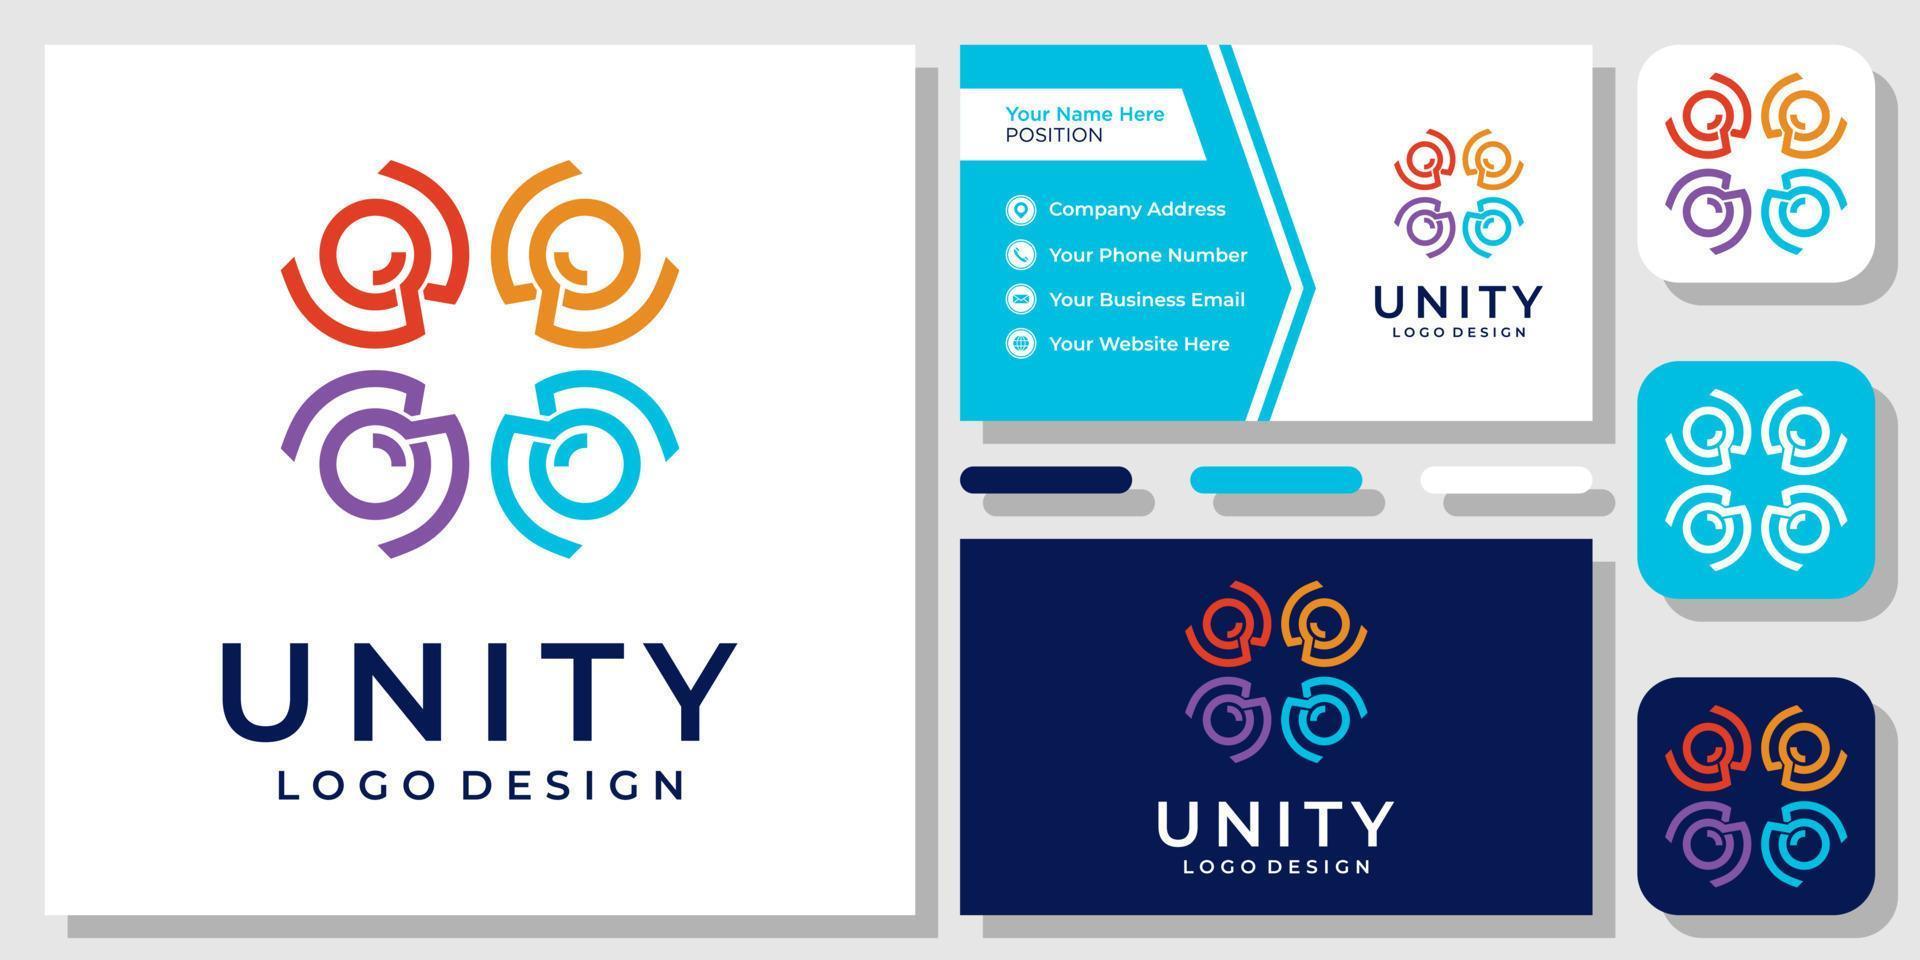 Community Happy People Unity Circular Group Social Family Logo Design with Business Card Template vector